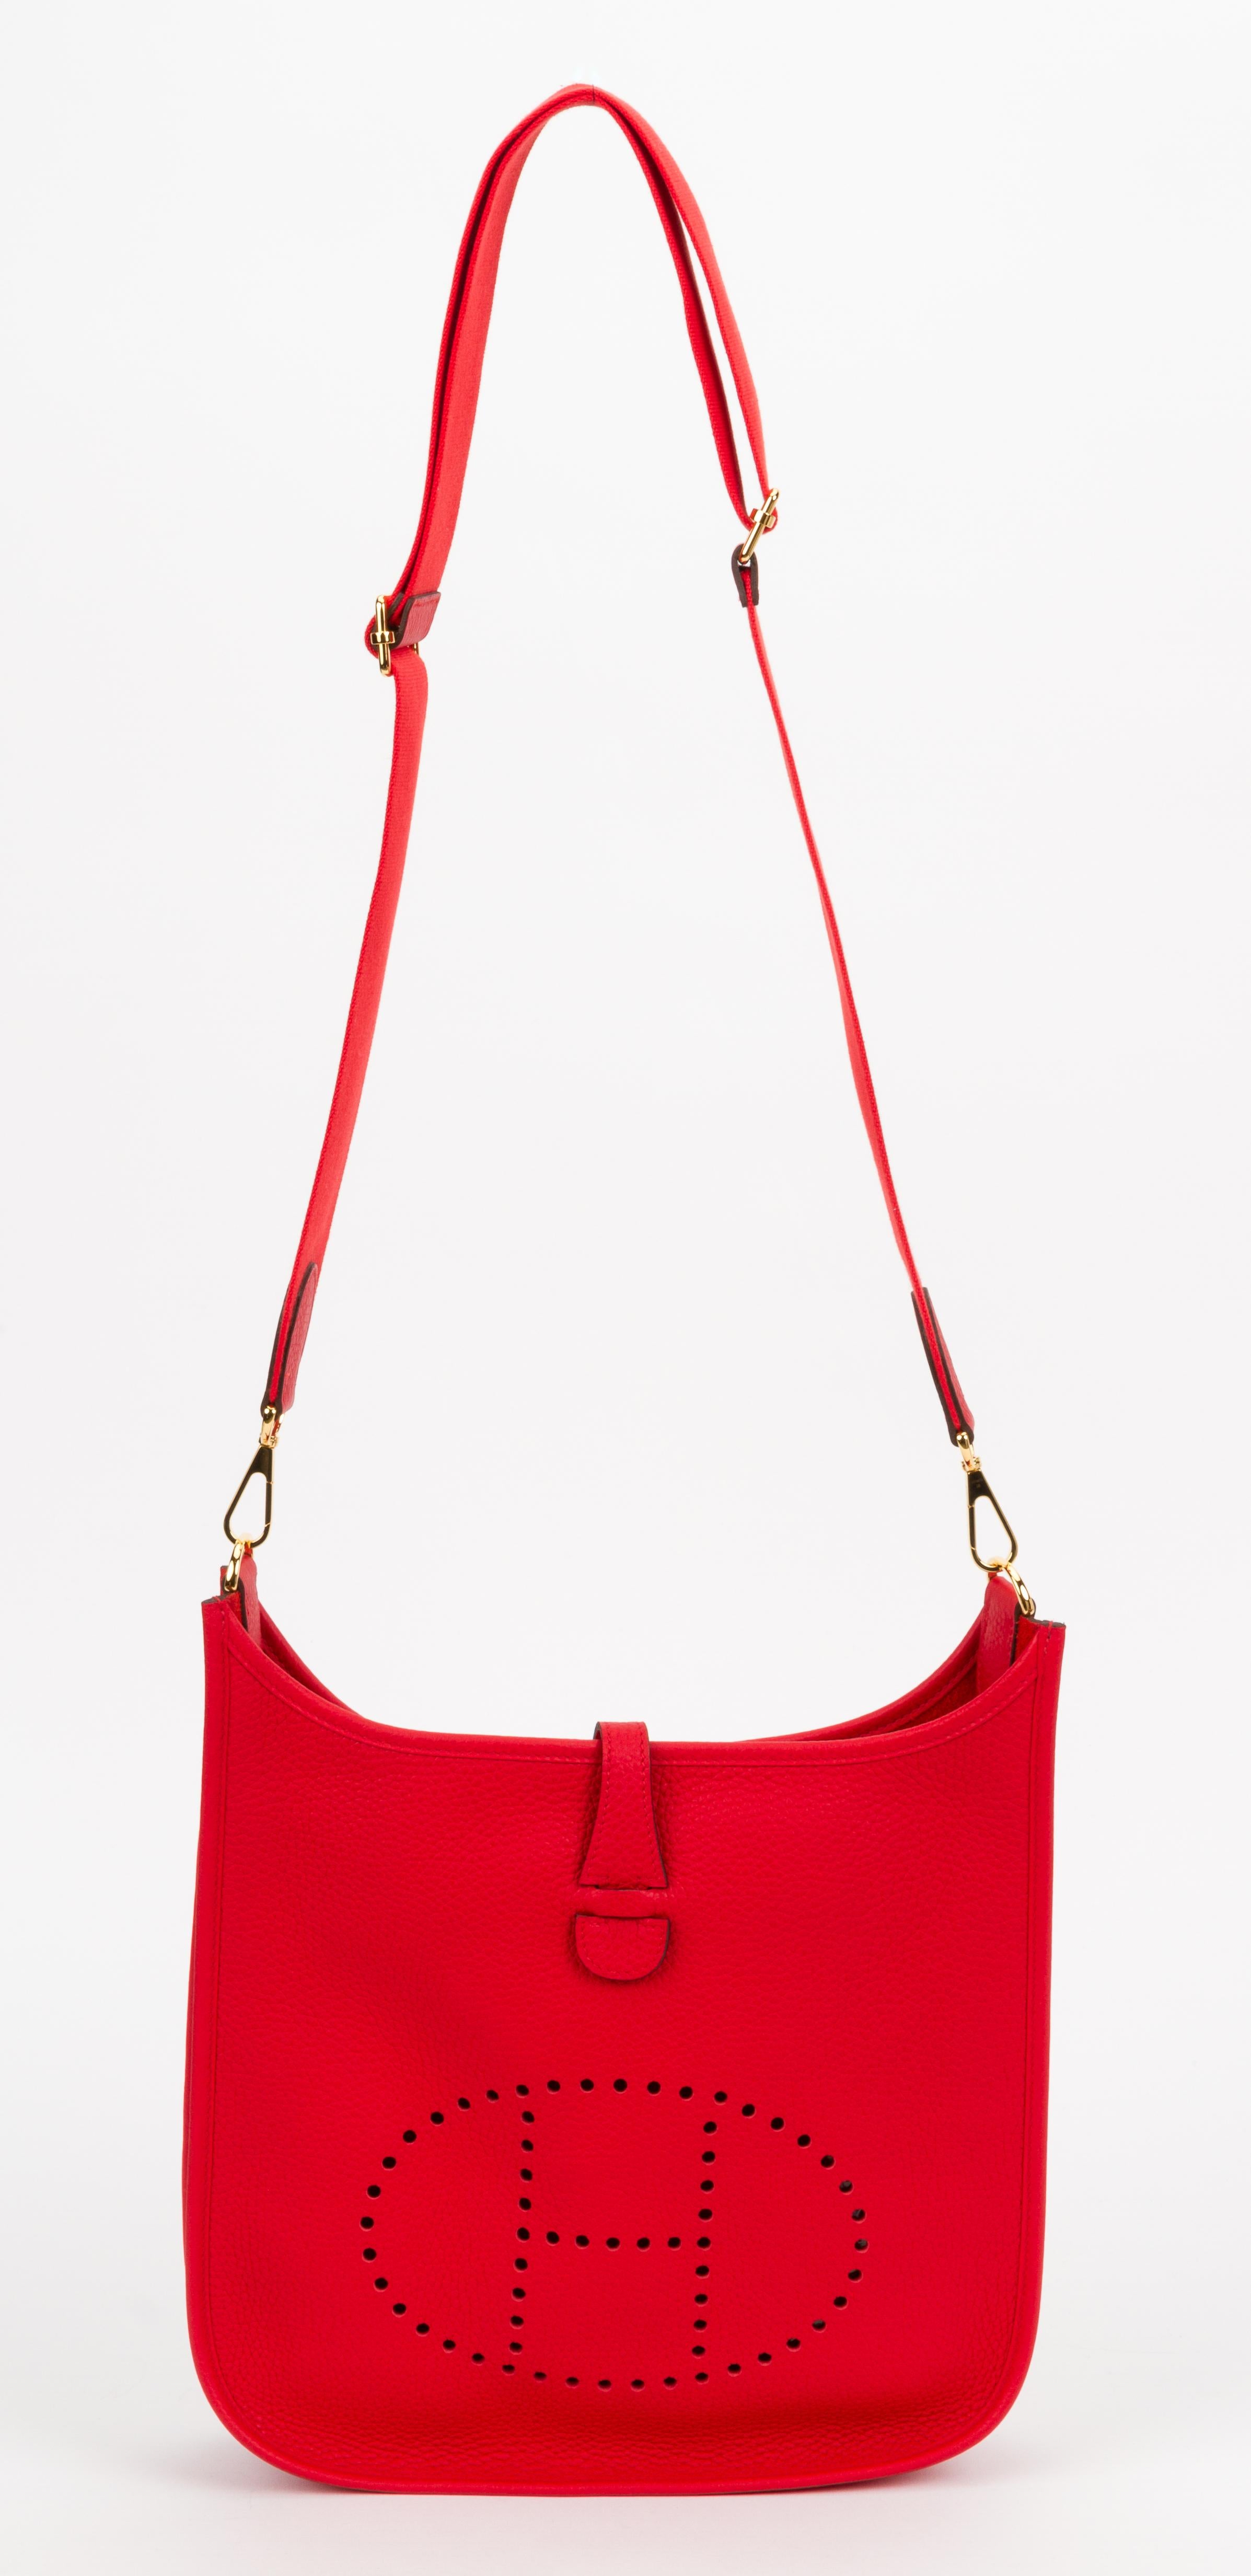 Hermès brand new 2020 color rouge de couer clemence leather medium Evelyne bag with gold tone hardware. Adjustable shoulder strap, can be worn cross body. Date stamp AT for 2020. Comes with 2 original dusters, shoulder strap, box, and ribbon.